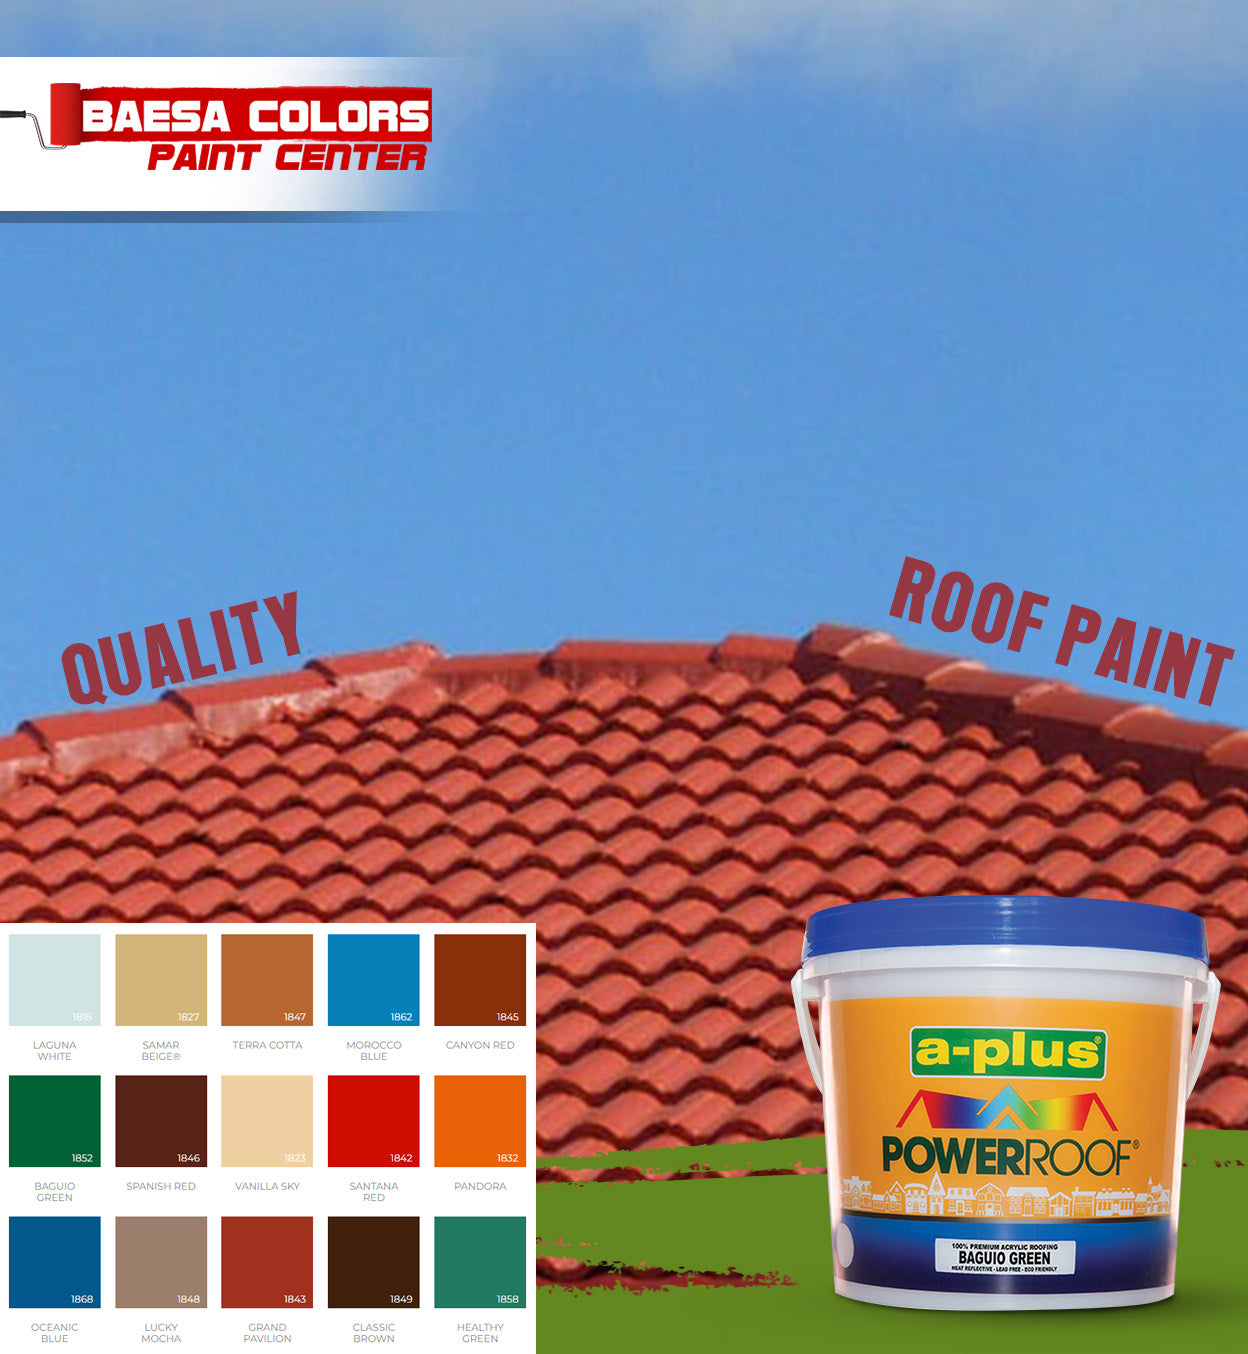 A-Plus PowerRoof® Acrylic Roofing Paint